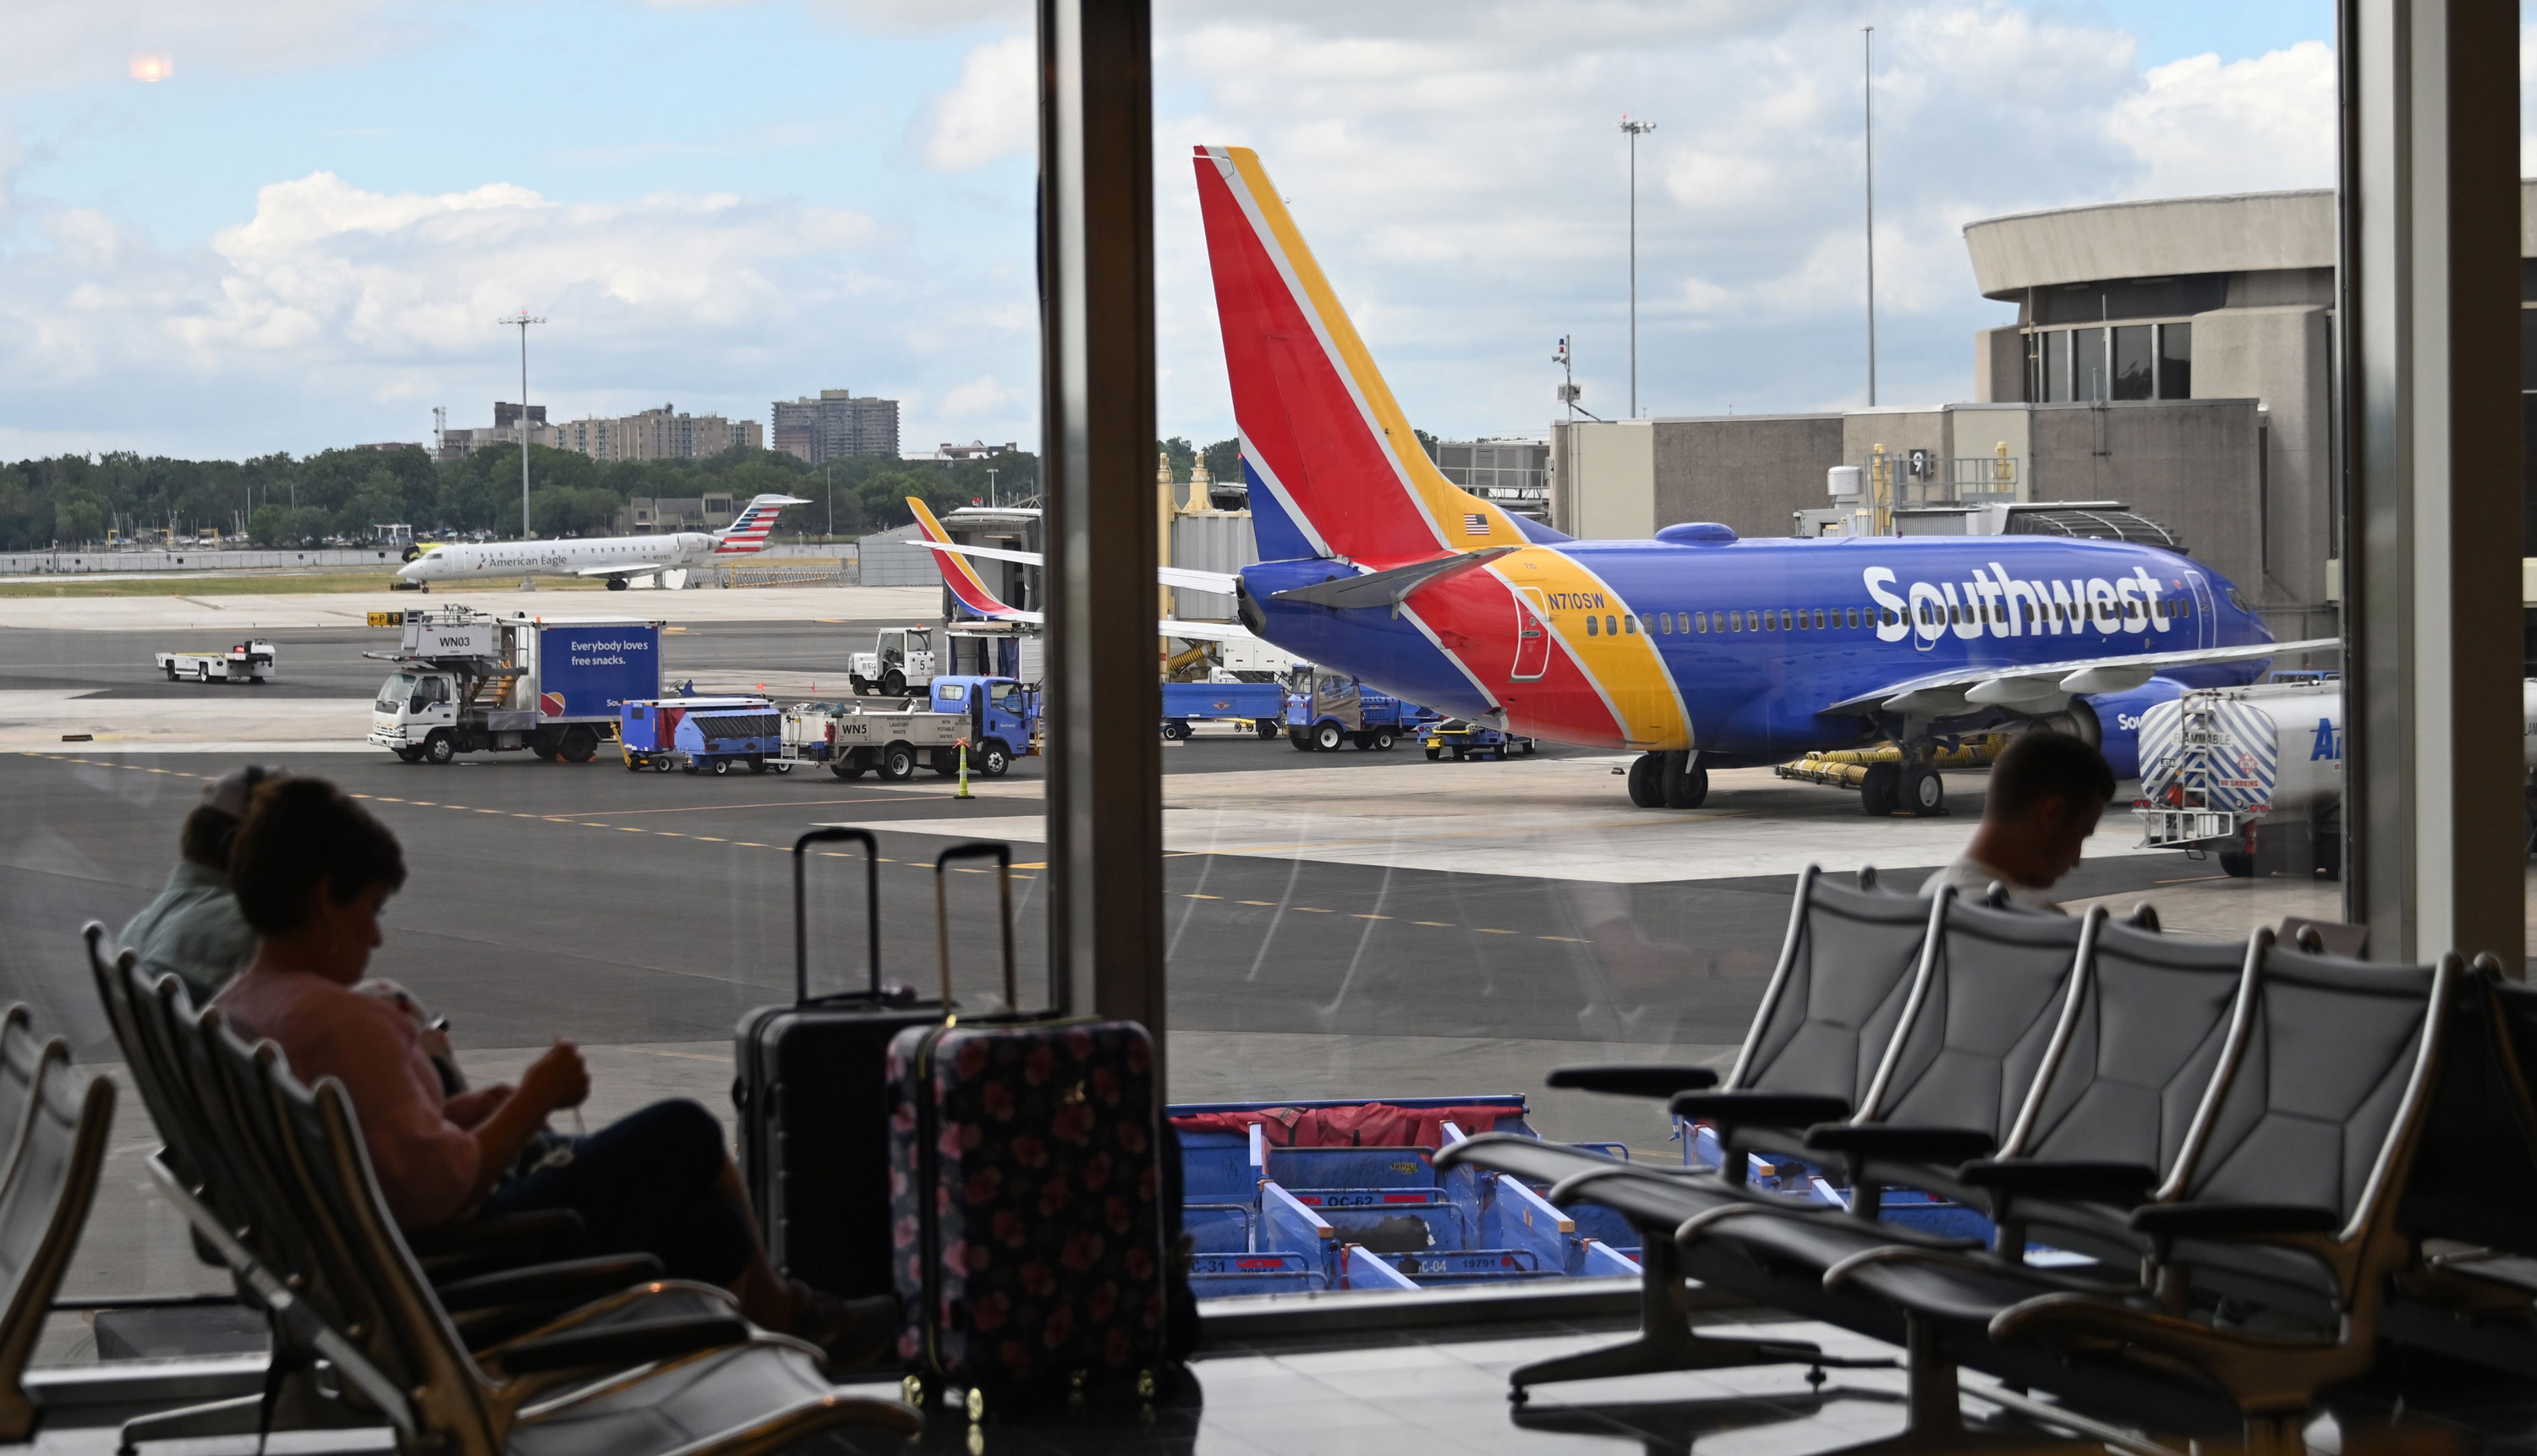 A Southwest Airlines plane is seen from a terminal at Ronald Reagan Washington National Airport on July 10 in Arlington, Virginia.